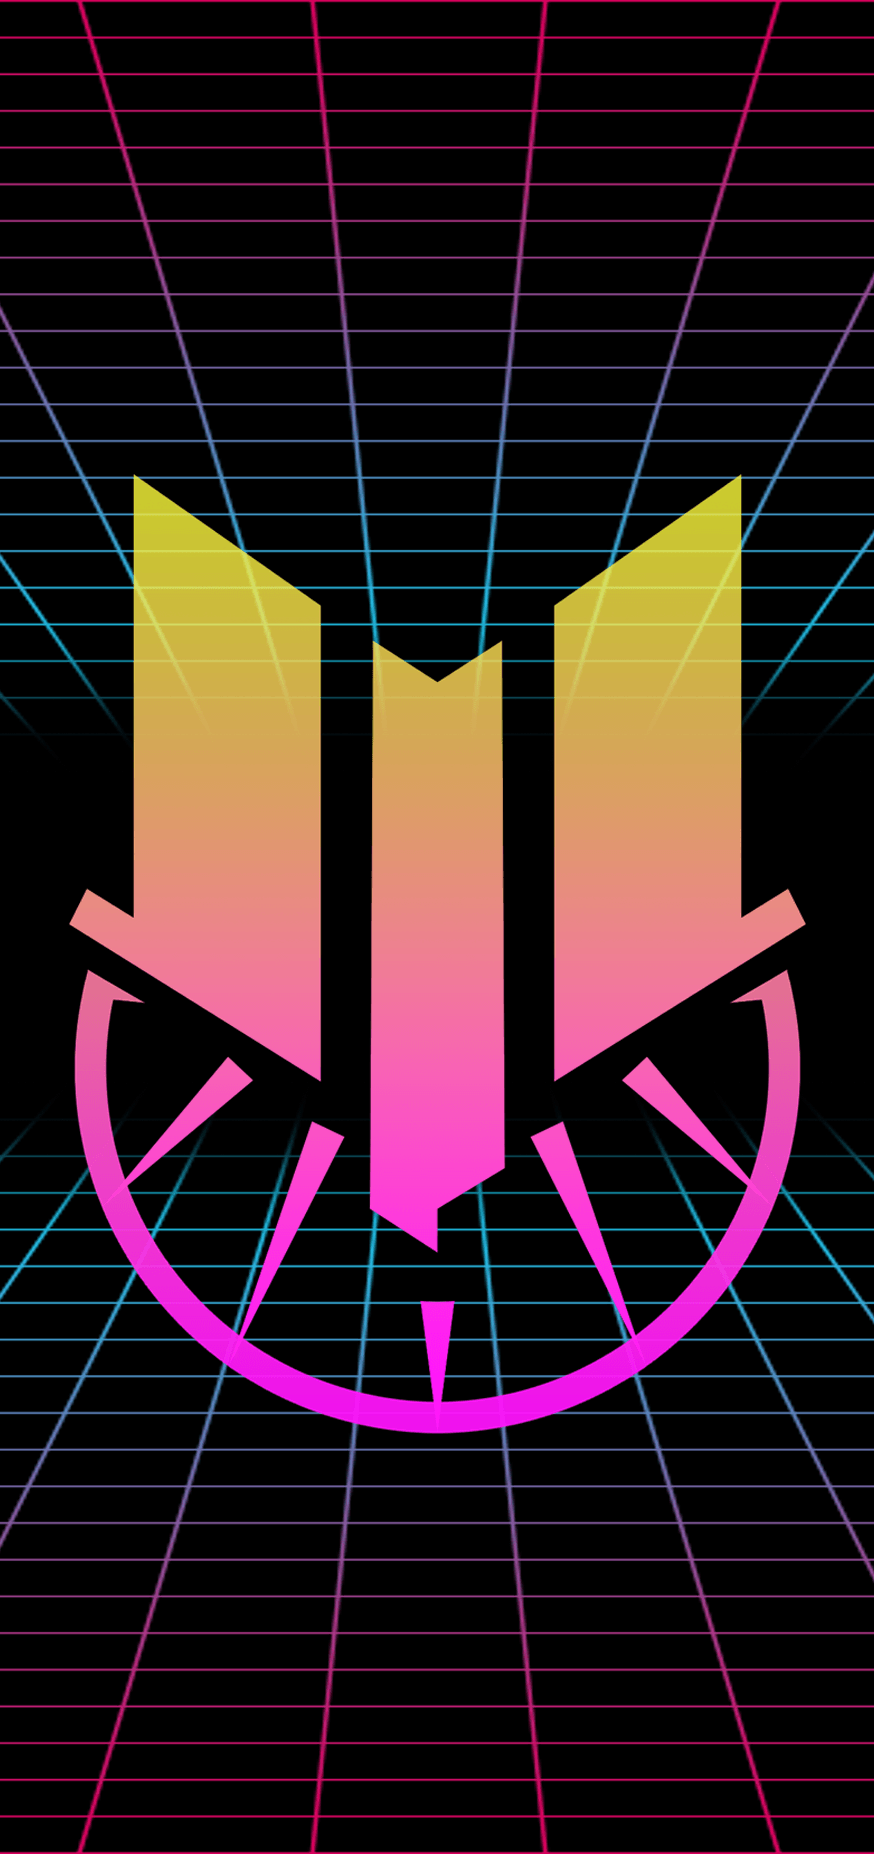 Made a phone wallpaper that i'l be using as a custom phone